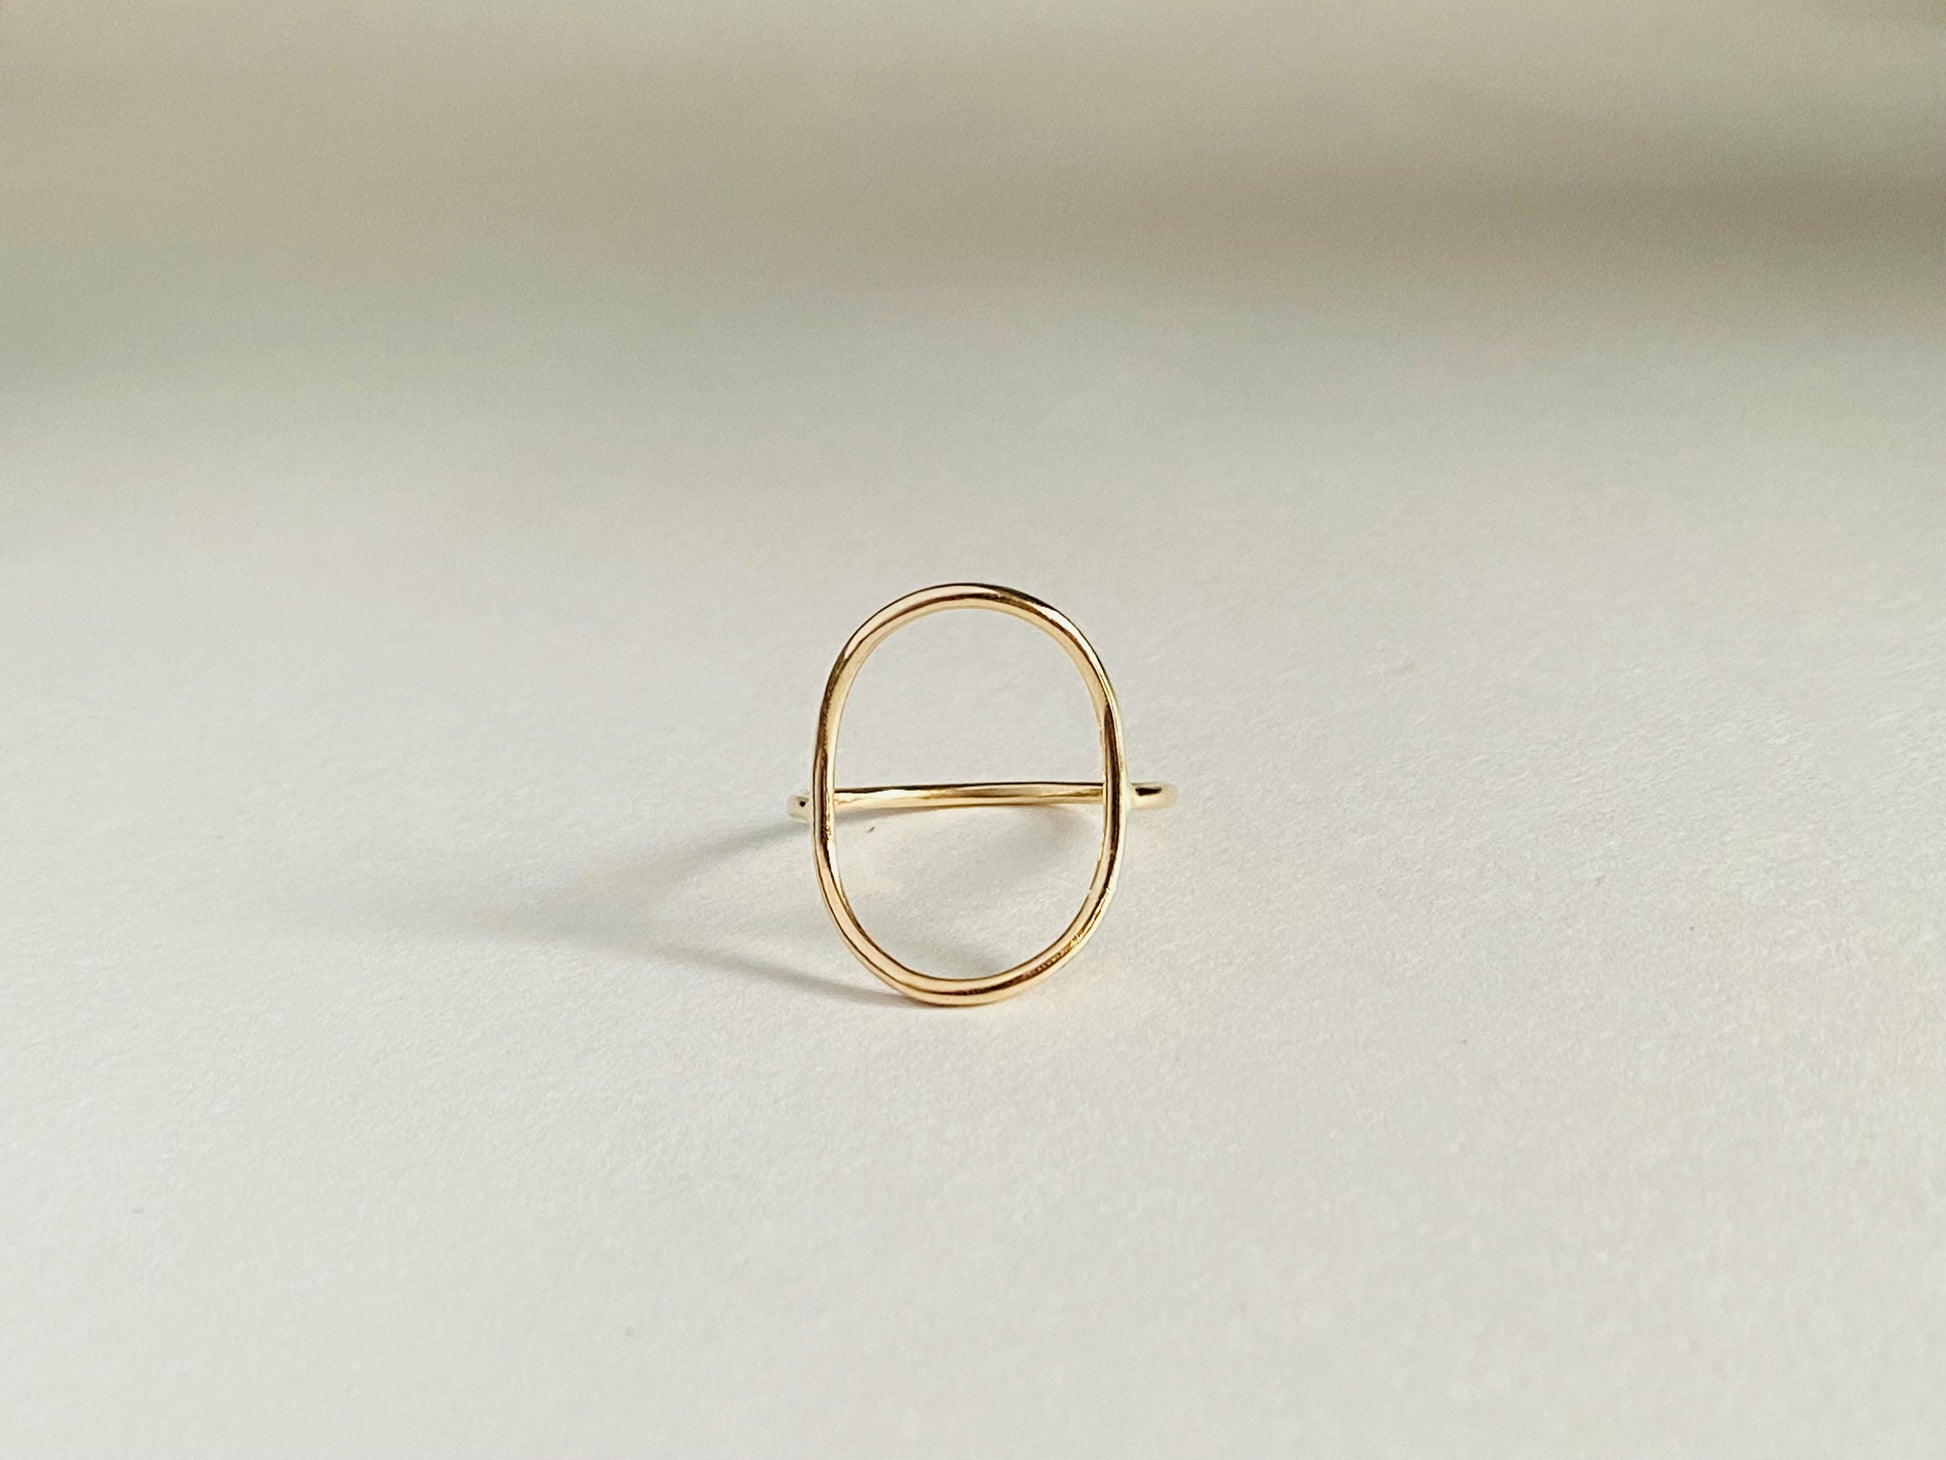 Gold filled oval ring with band attaching to either side of oval